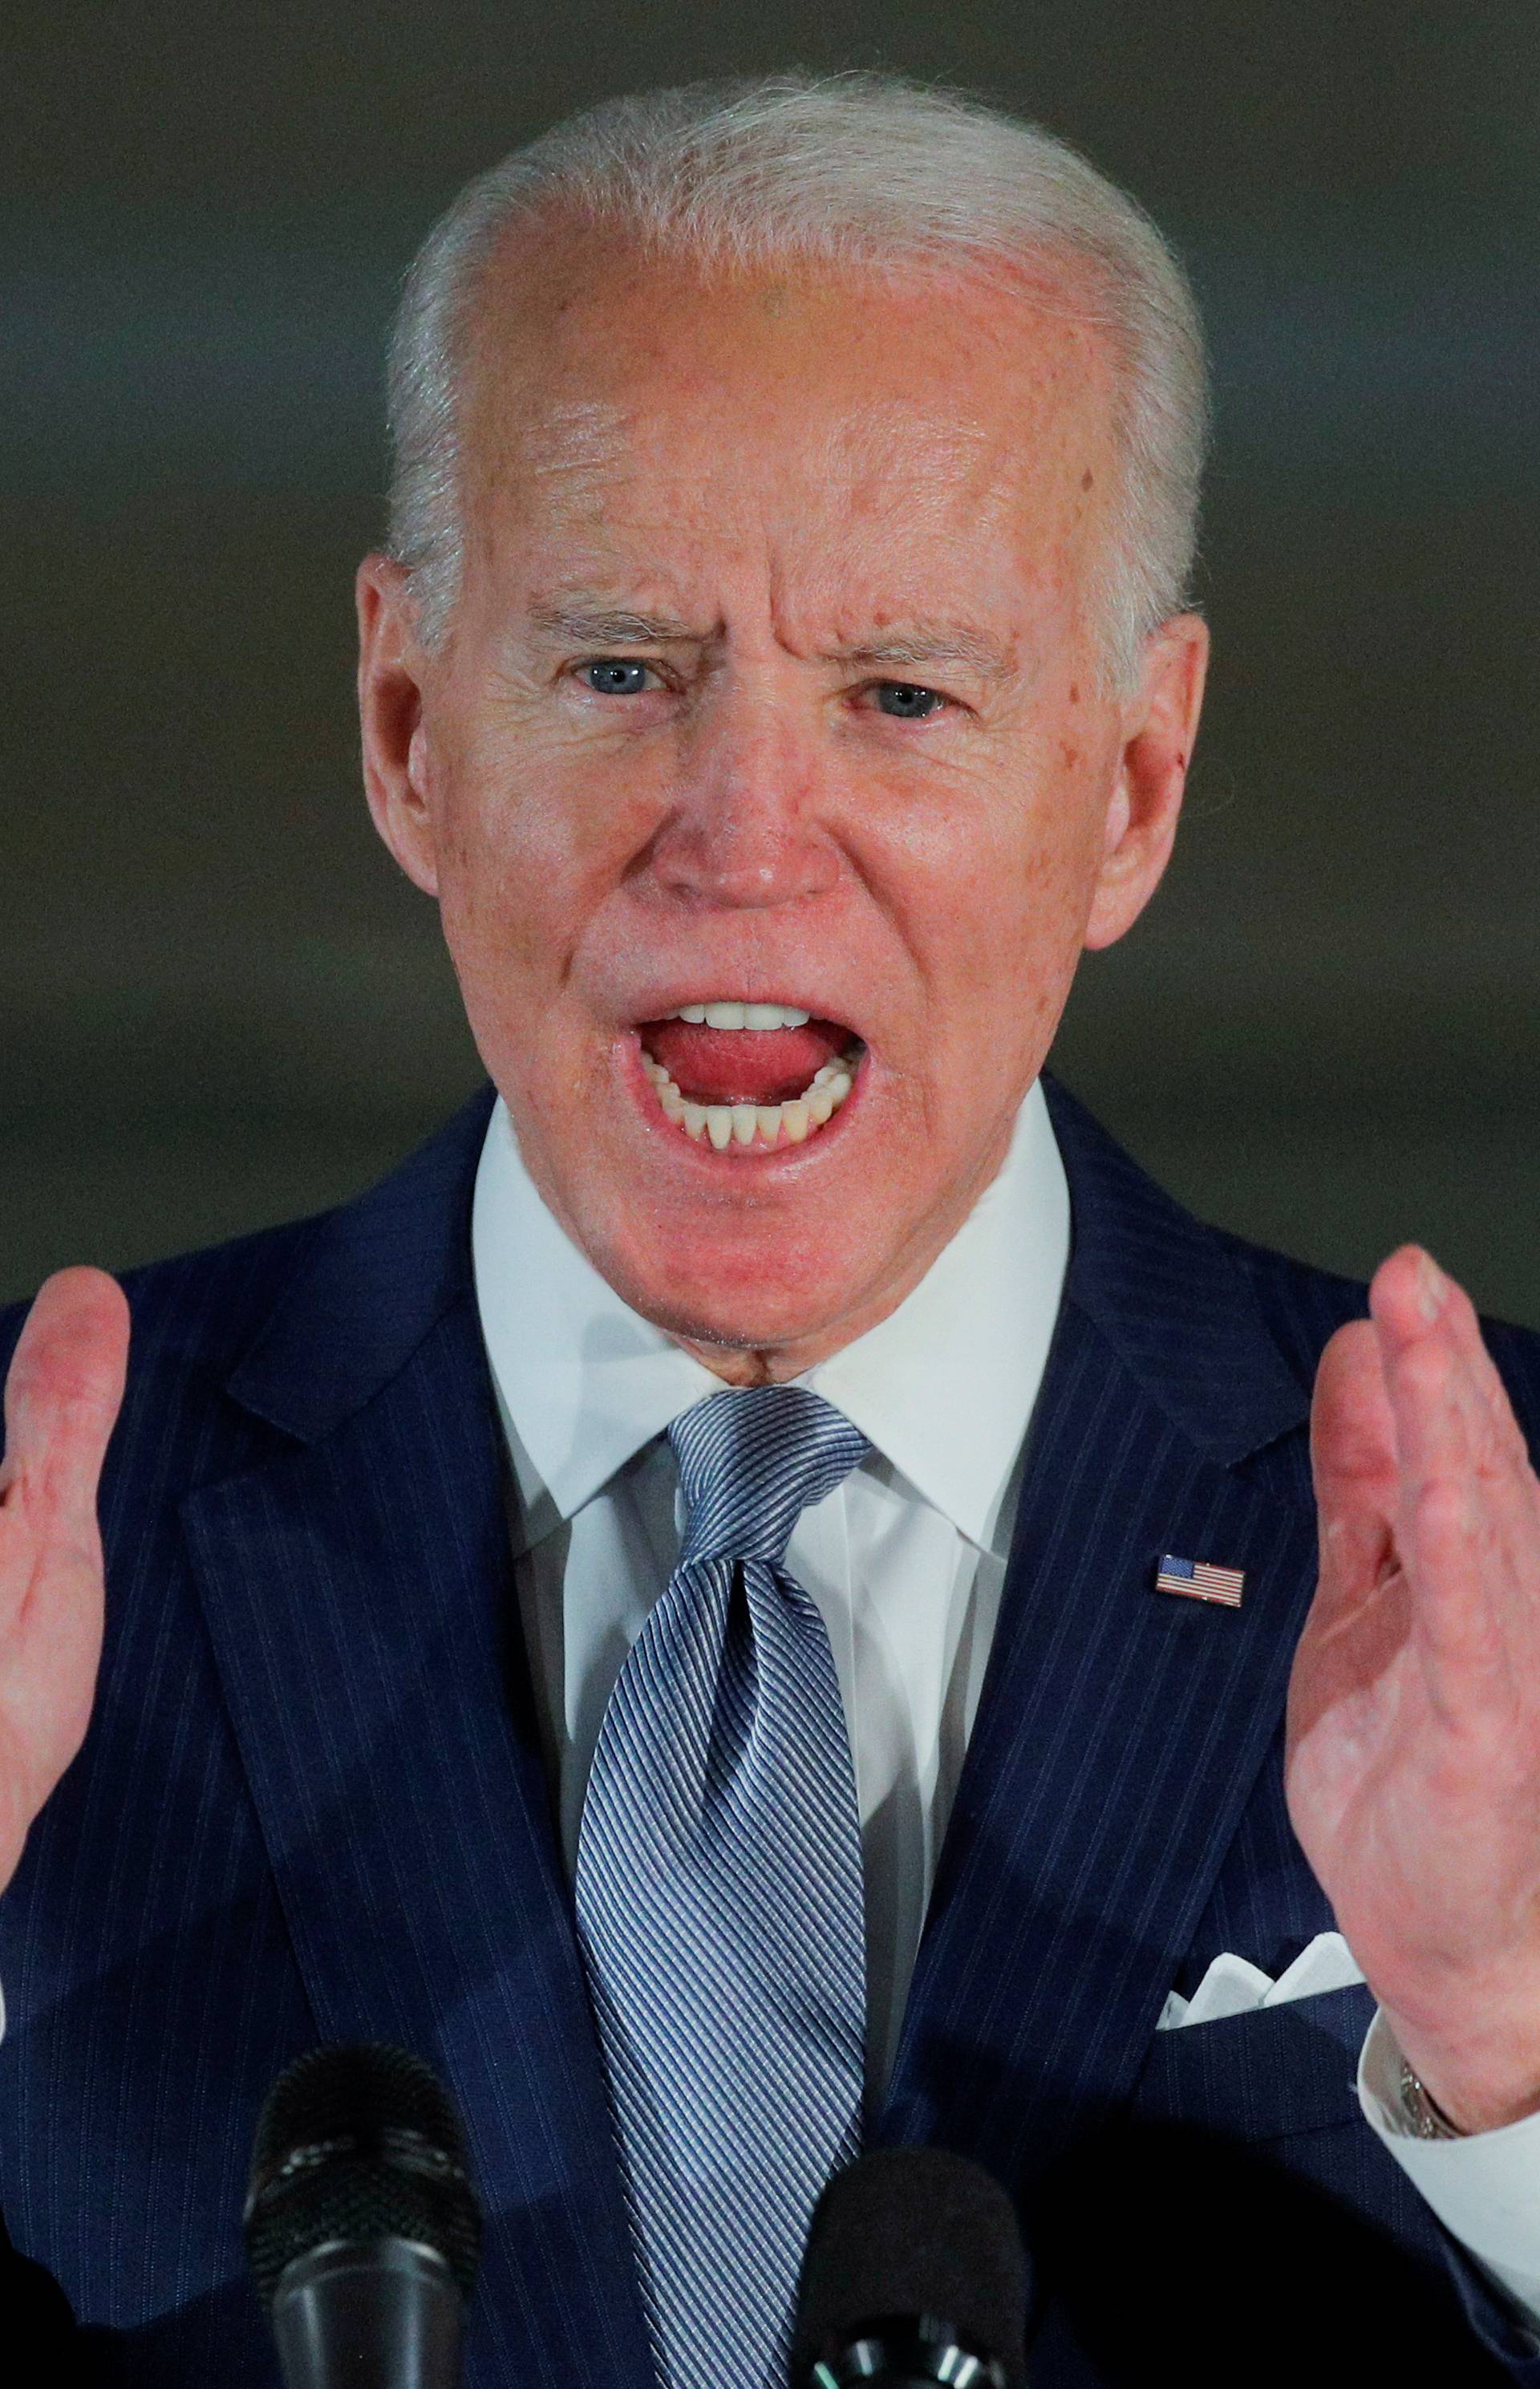 FILE PHOTO: Democratic U.S. presidential candidate and former Vice President Joe Biden speaks during a primary night appreance in Philadelphia